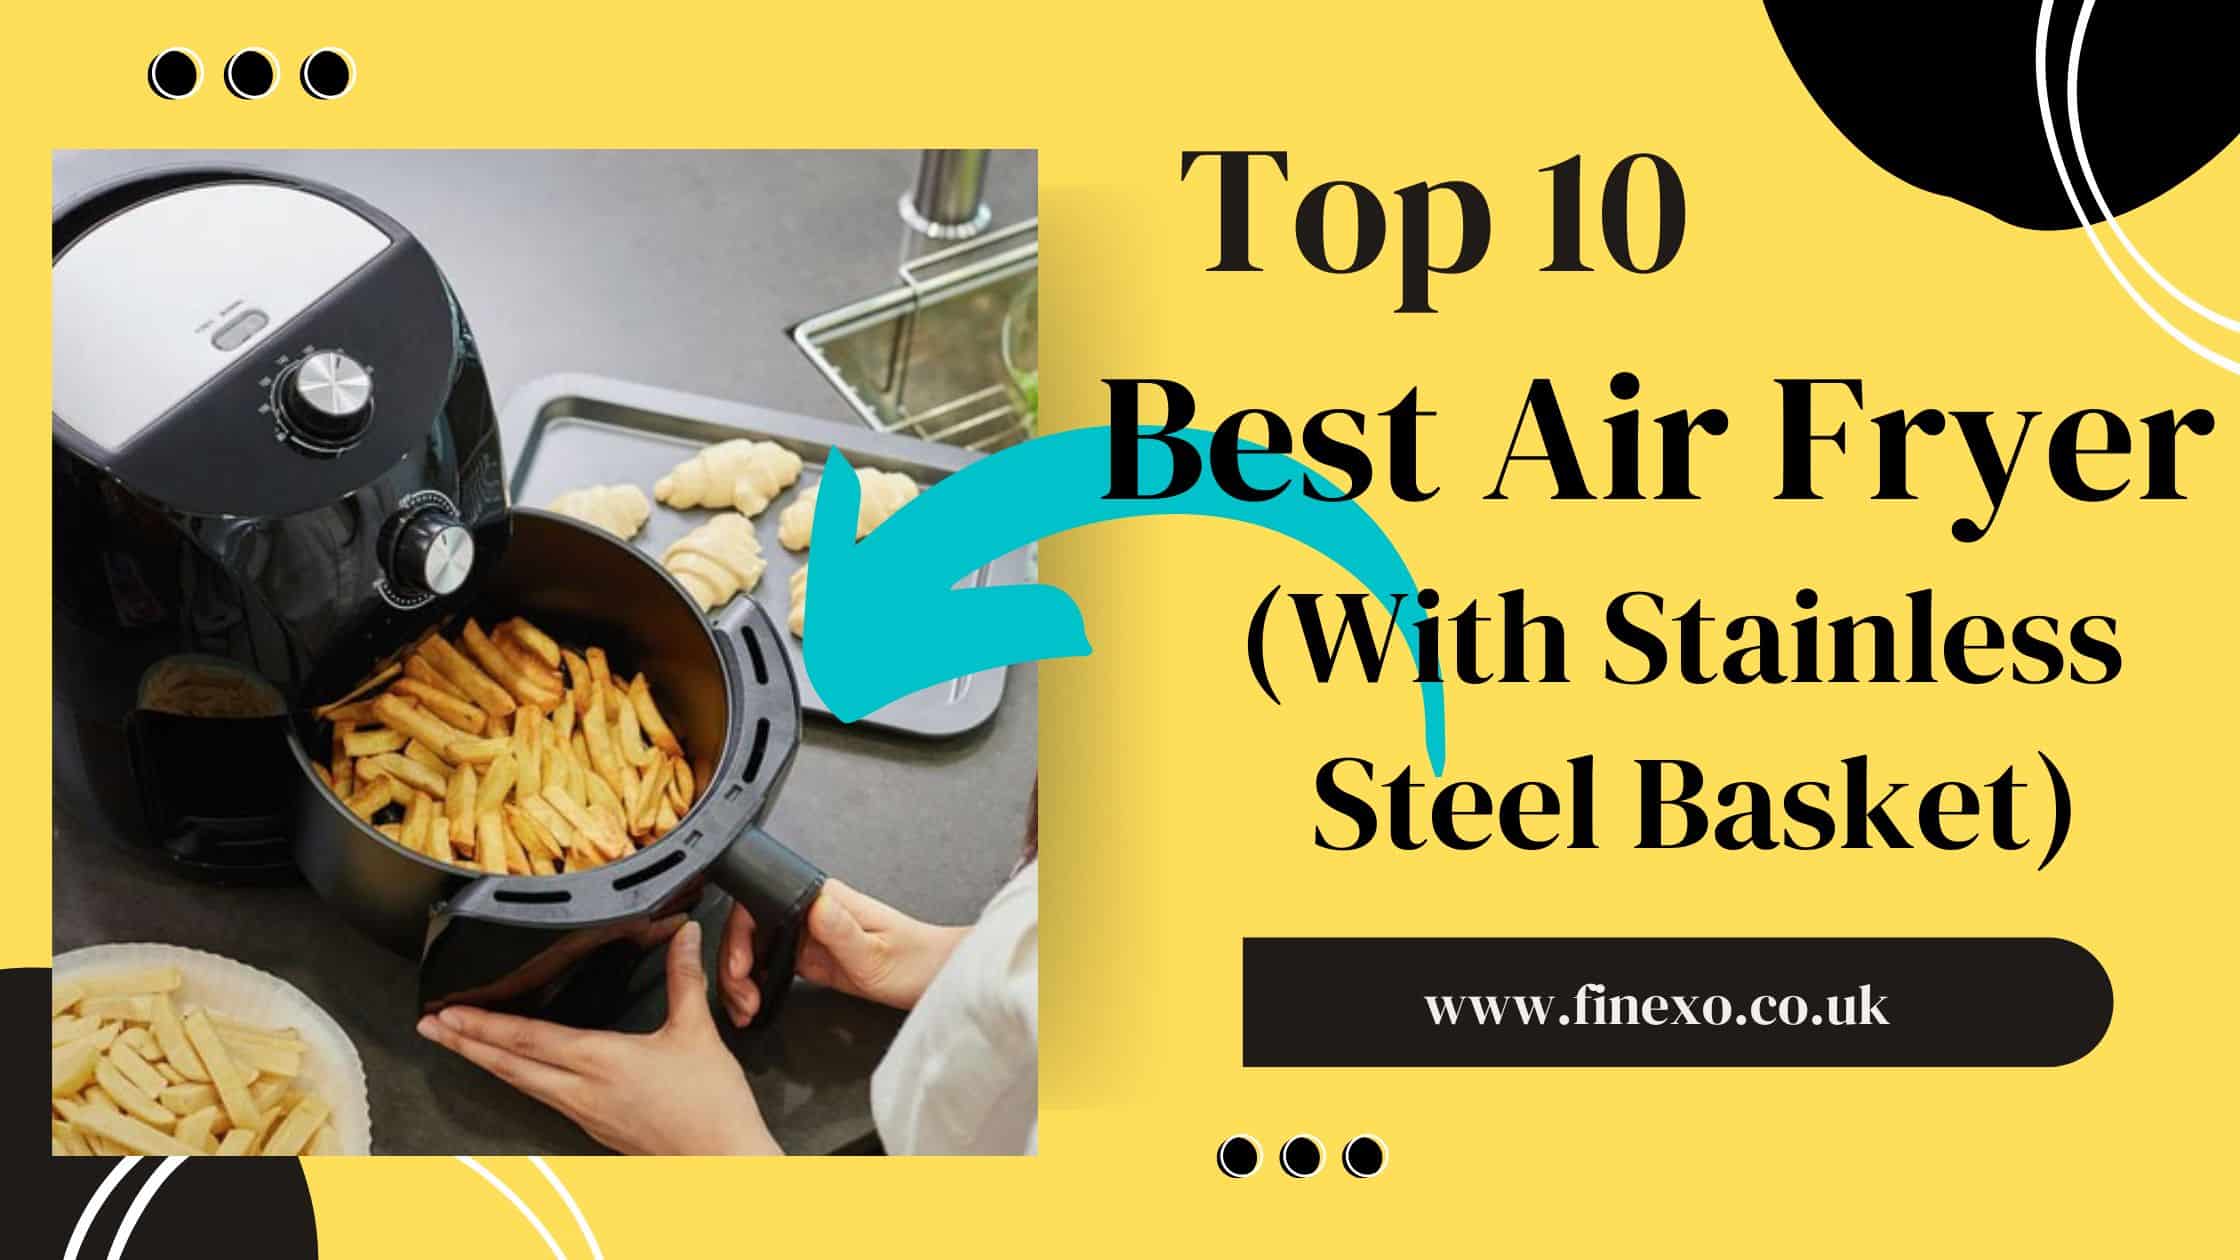 Top 10 Best Air Fryer With Stainless Steel Basket